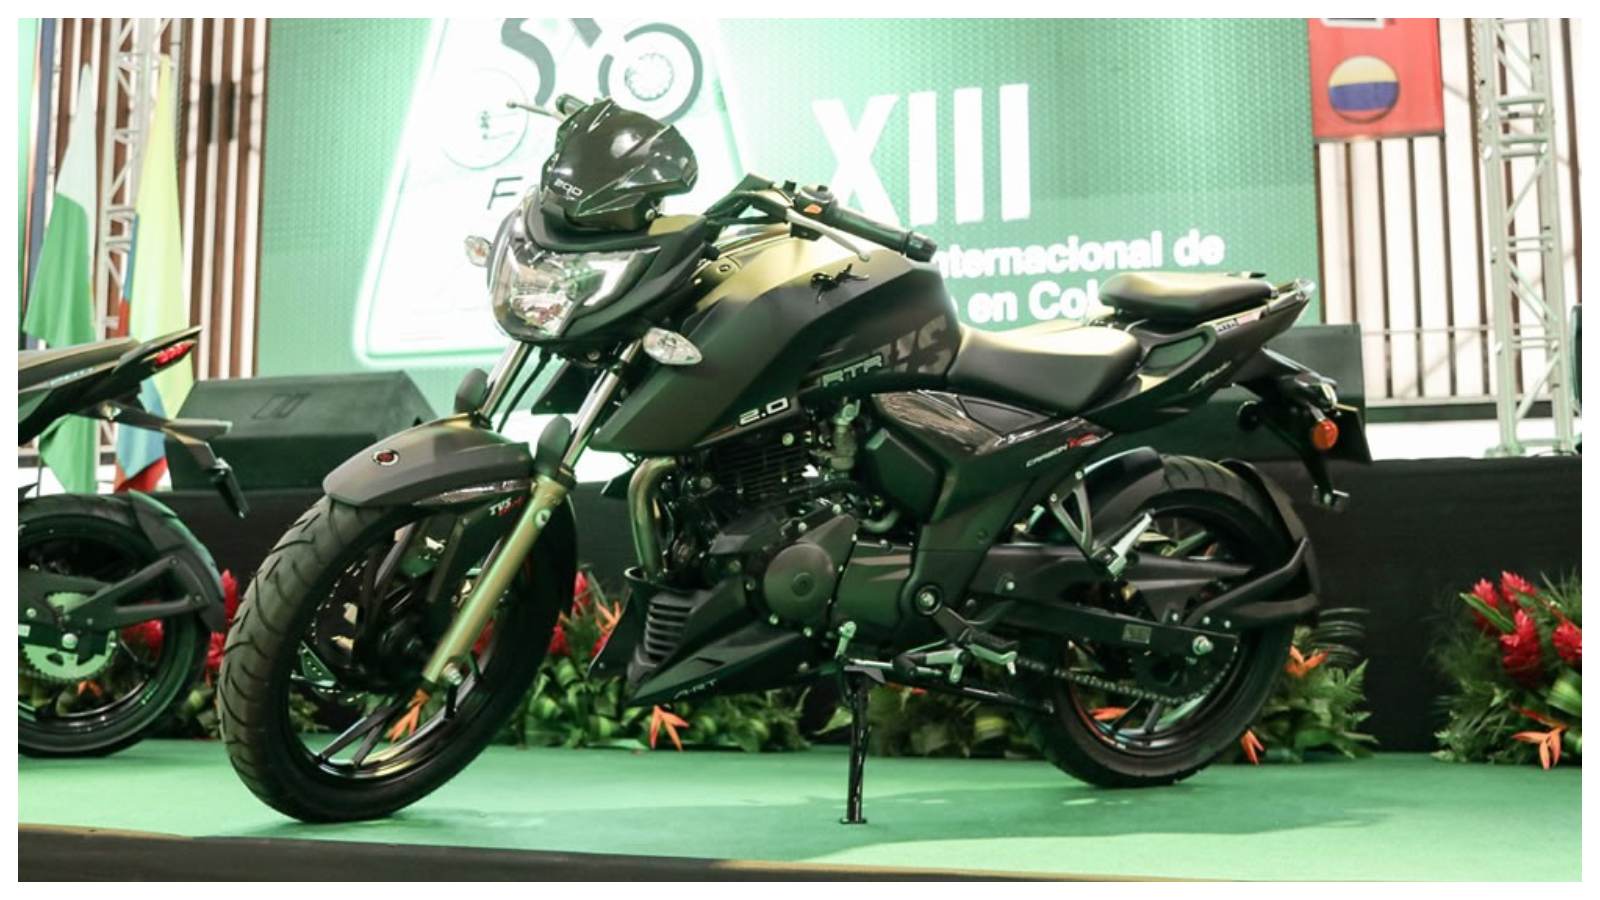 Carbon Editions Of Tvs Apache Rtr 160 4v And Rtr 200 4v Unveiled In Colombia Motoroids